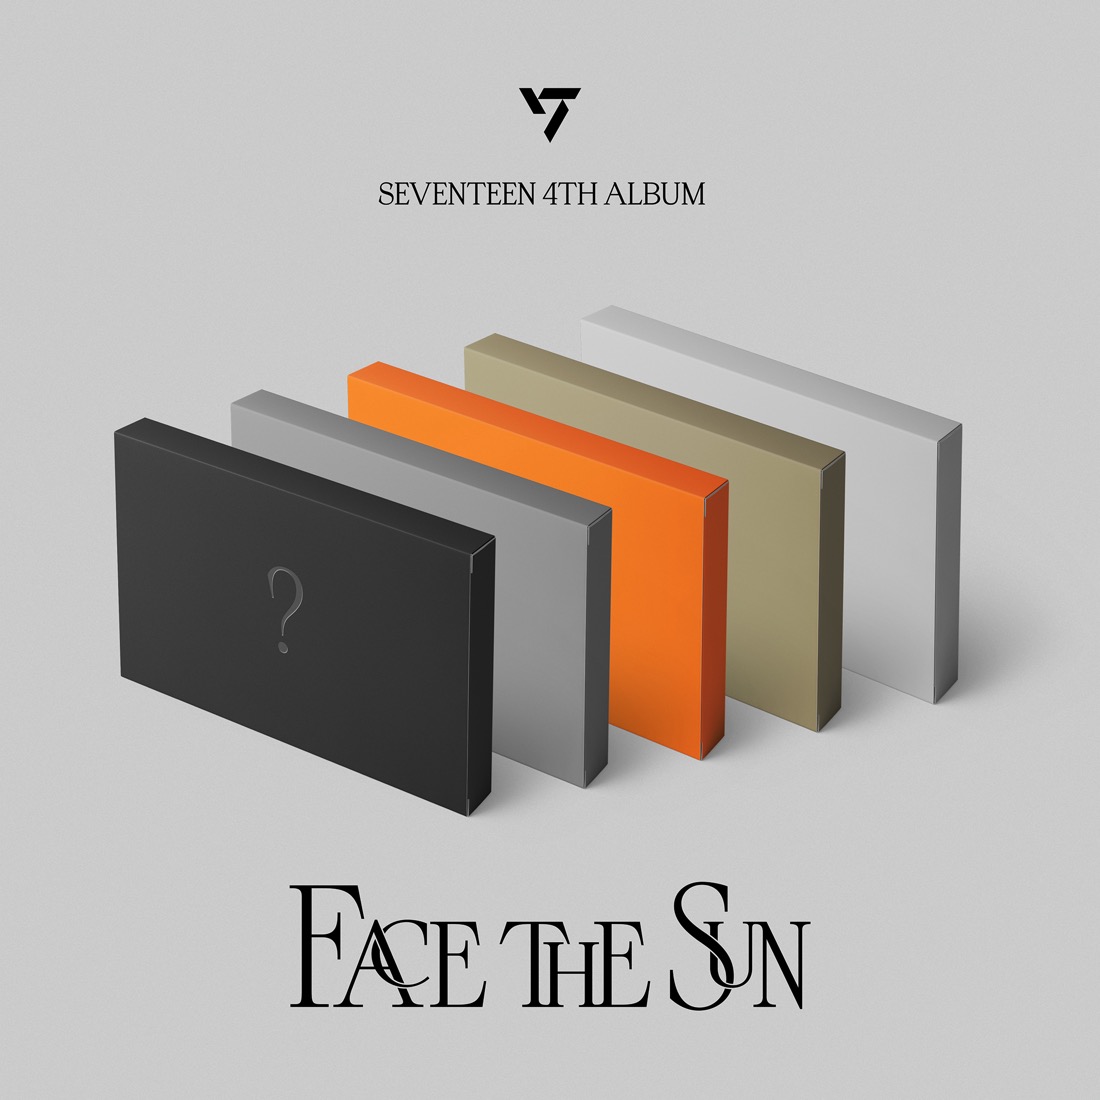 SEVENTEEN、4thアルバム『Face the Sun』日本発売日が決定 - 画像一覧（1/1）